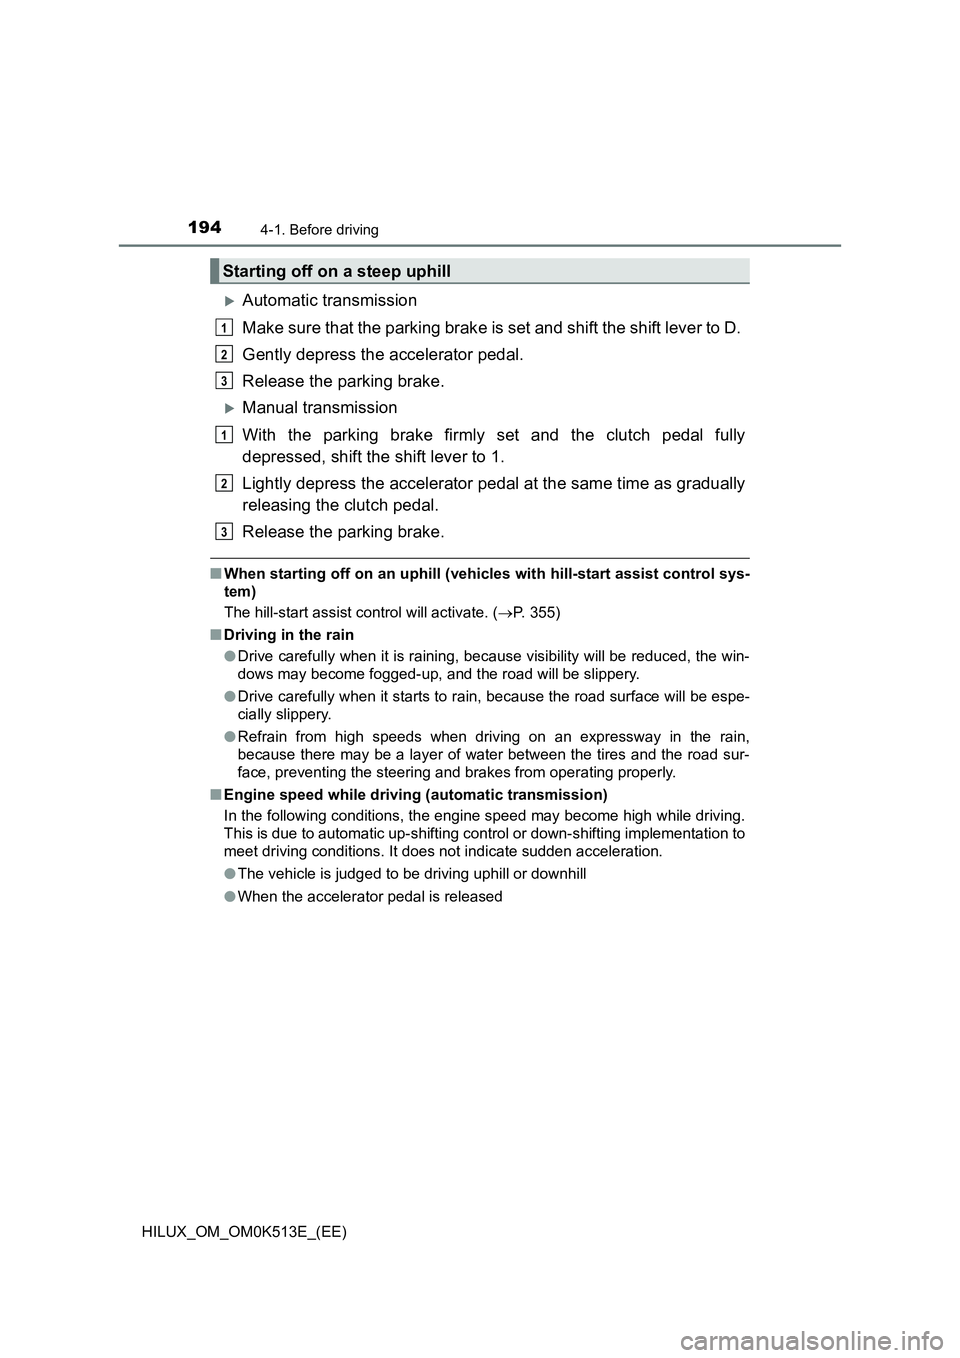 TOYOTA HILUX 2021  Owners Manual (in English) 1944-1. Before driving
HILUX_OM_OM0K513E_(EE)
Automatic transmission 
Make sure that the parking brake is set and shift the shift lever to D.  
Gently depress the accelerator pedal.  
Release the p